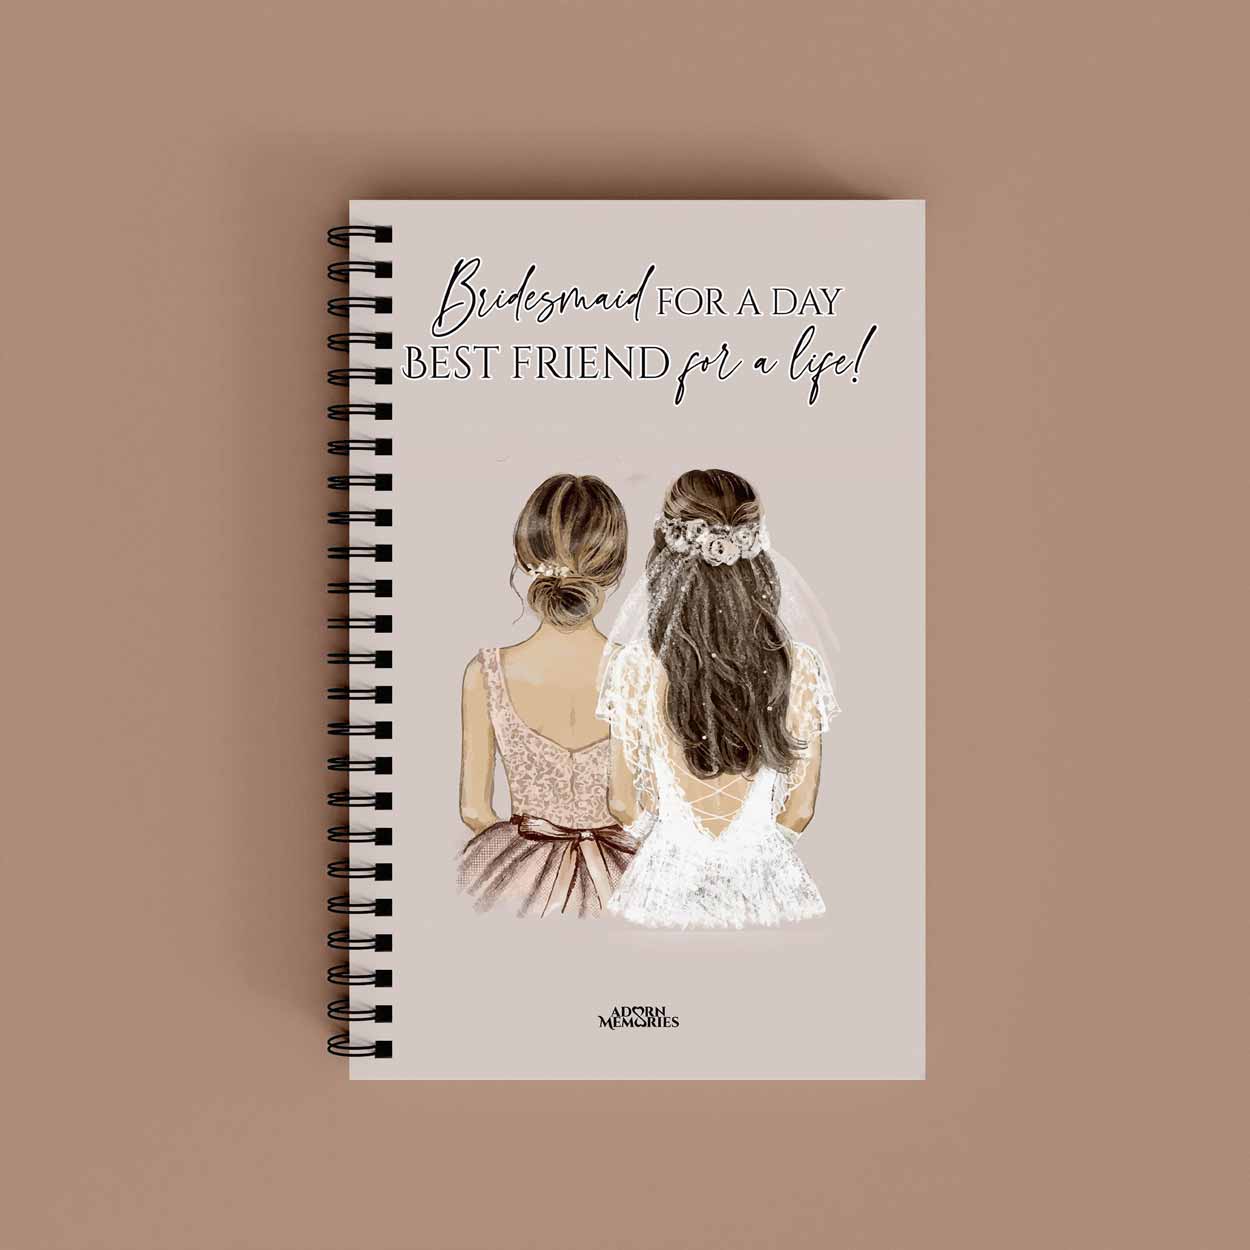 Gift For BridesMaid Notebook Favors